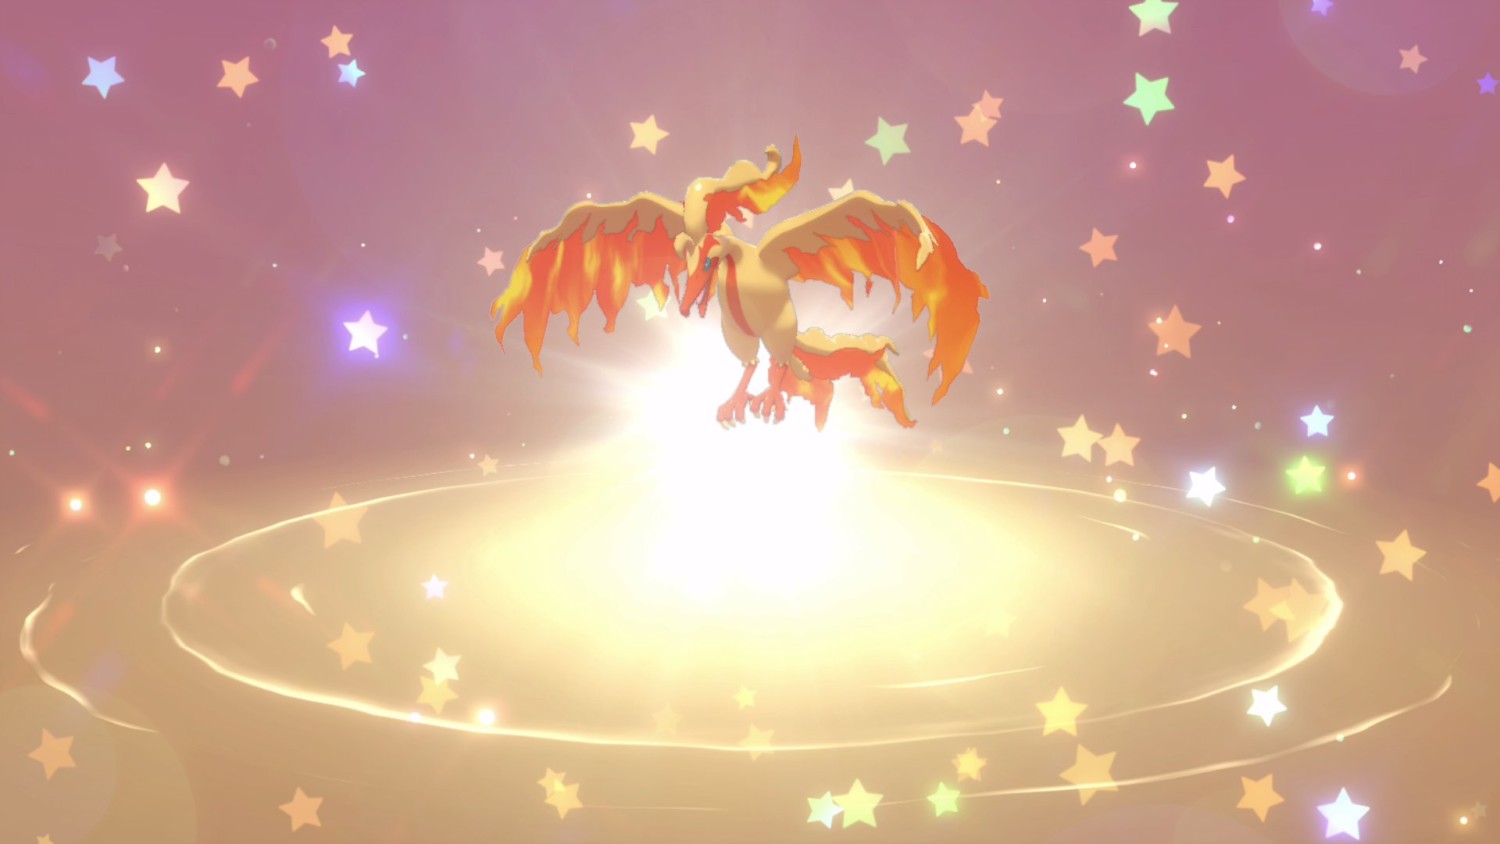 Shiny Galarian Moltres Gift Now Available For Pokemon Sword/Shield 2022  International Challenge April Participants – NintendoSoup